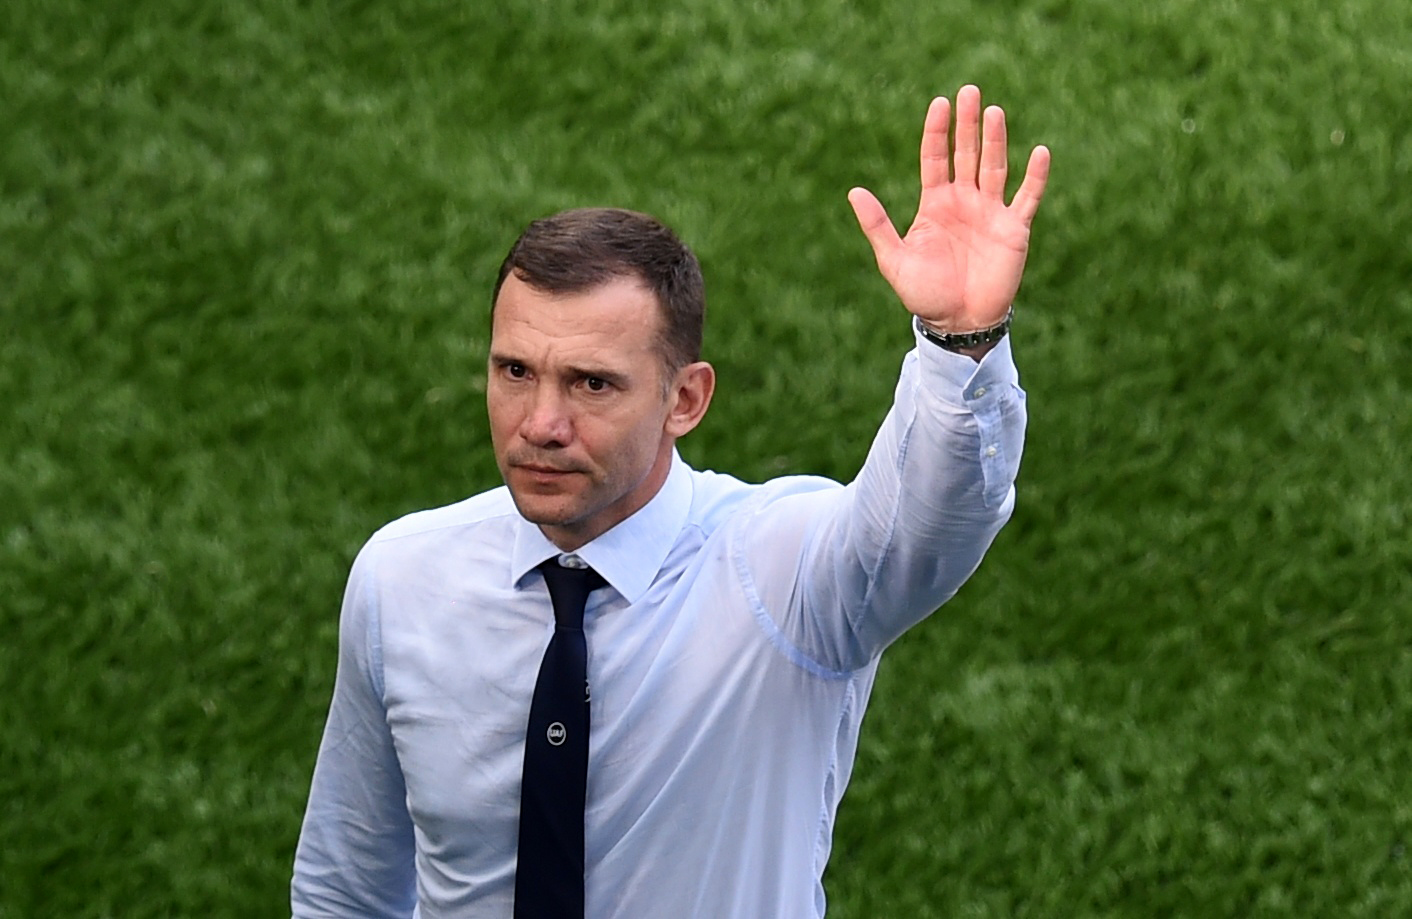 Ukraine affected by nerves in win over North Macedonia - Shevchenko | Reuters